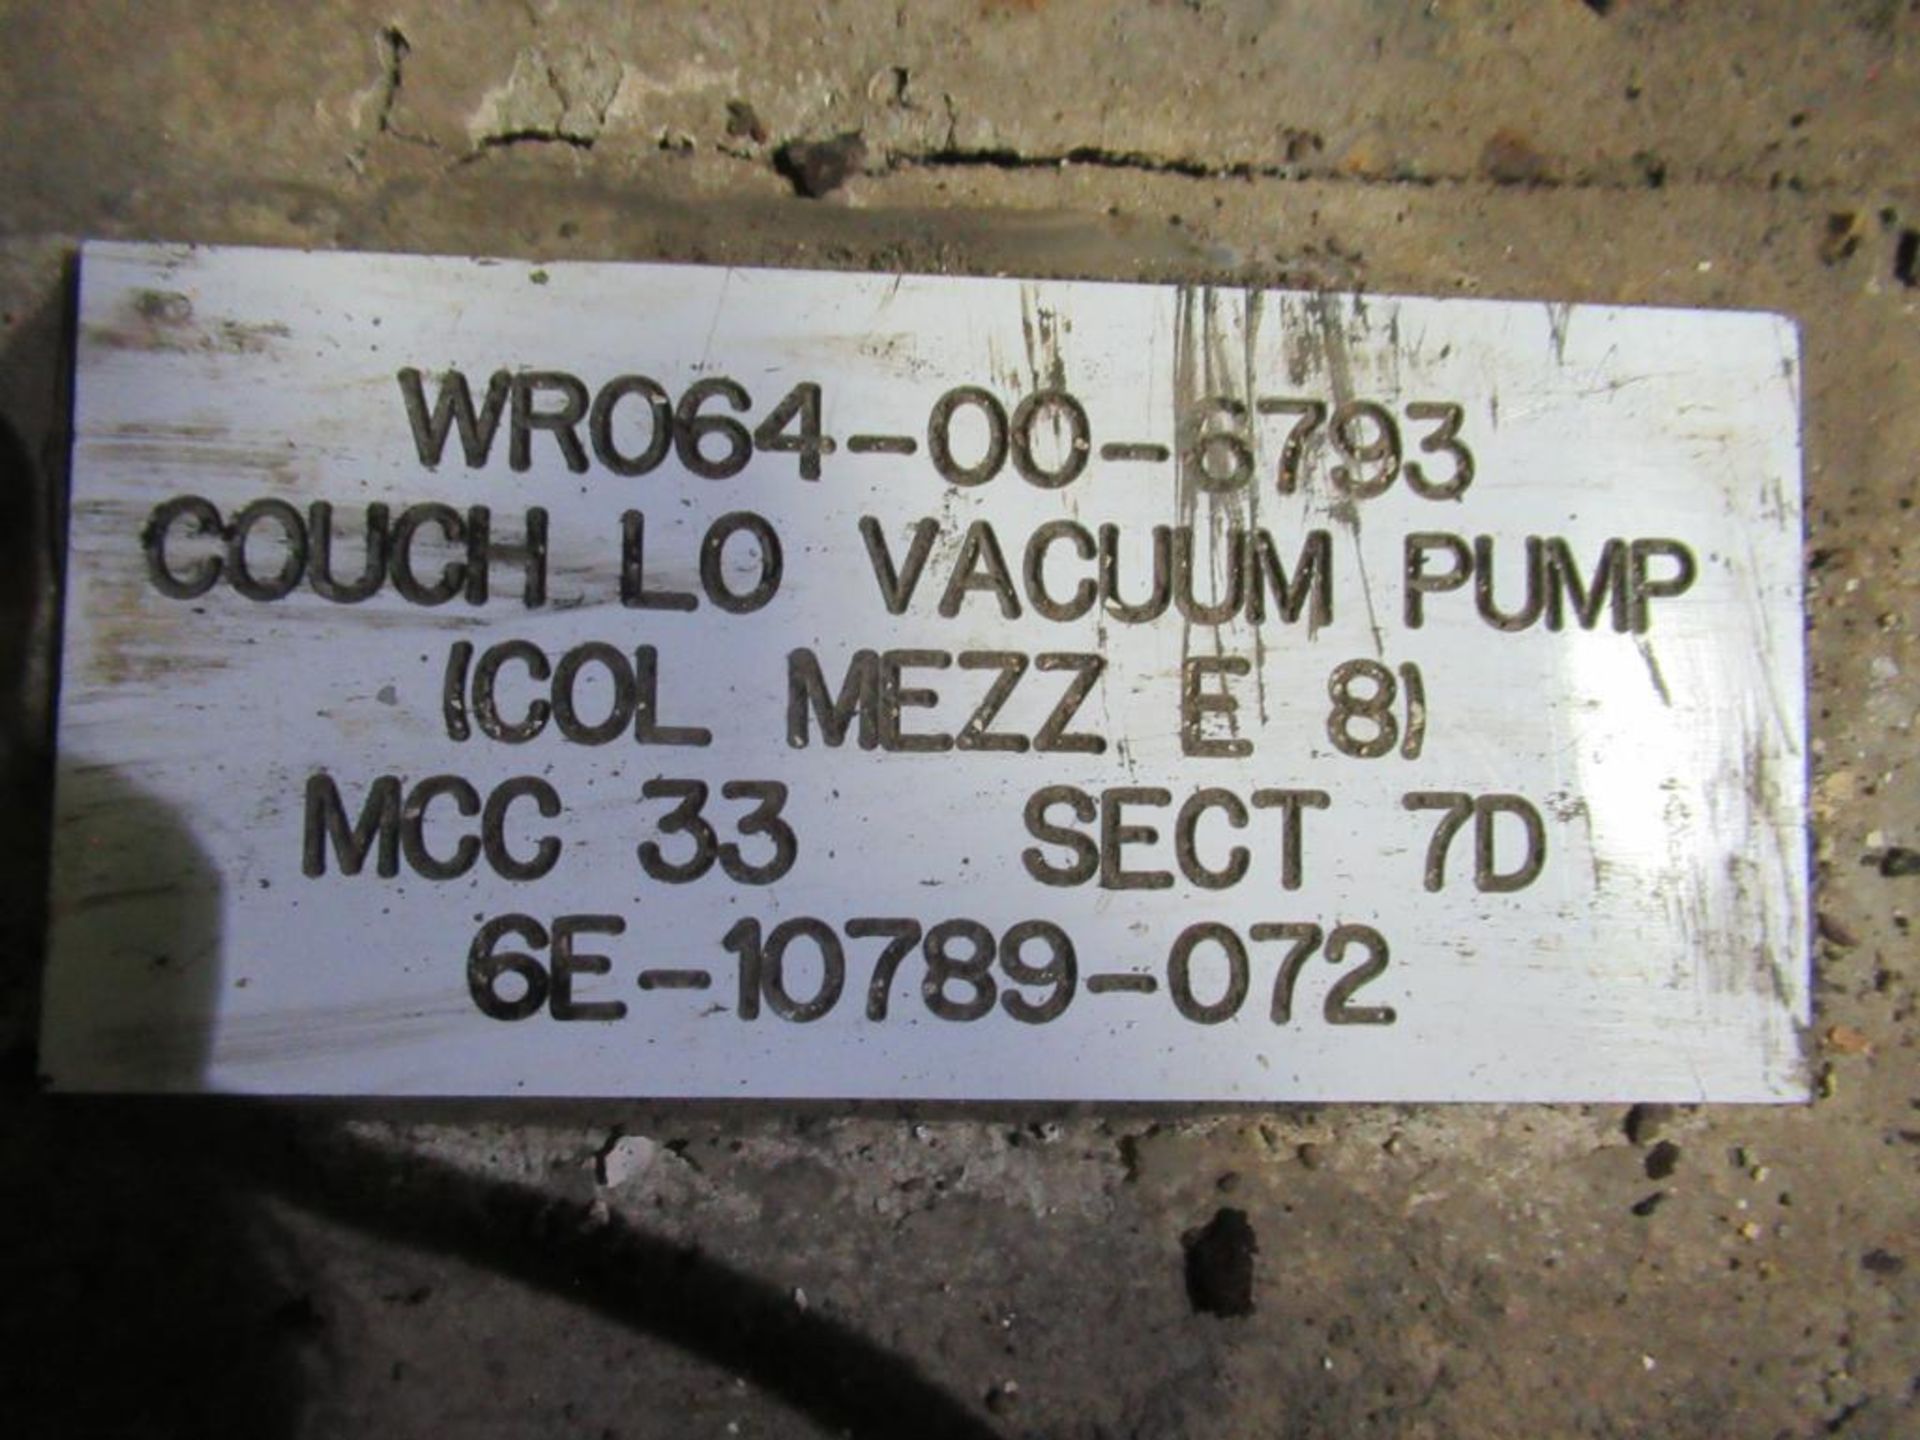 Couch Lo Vacuum Pump - Image 3 of 3